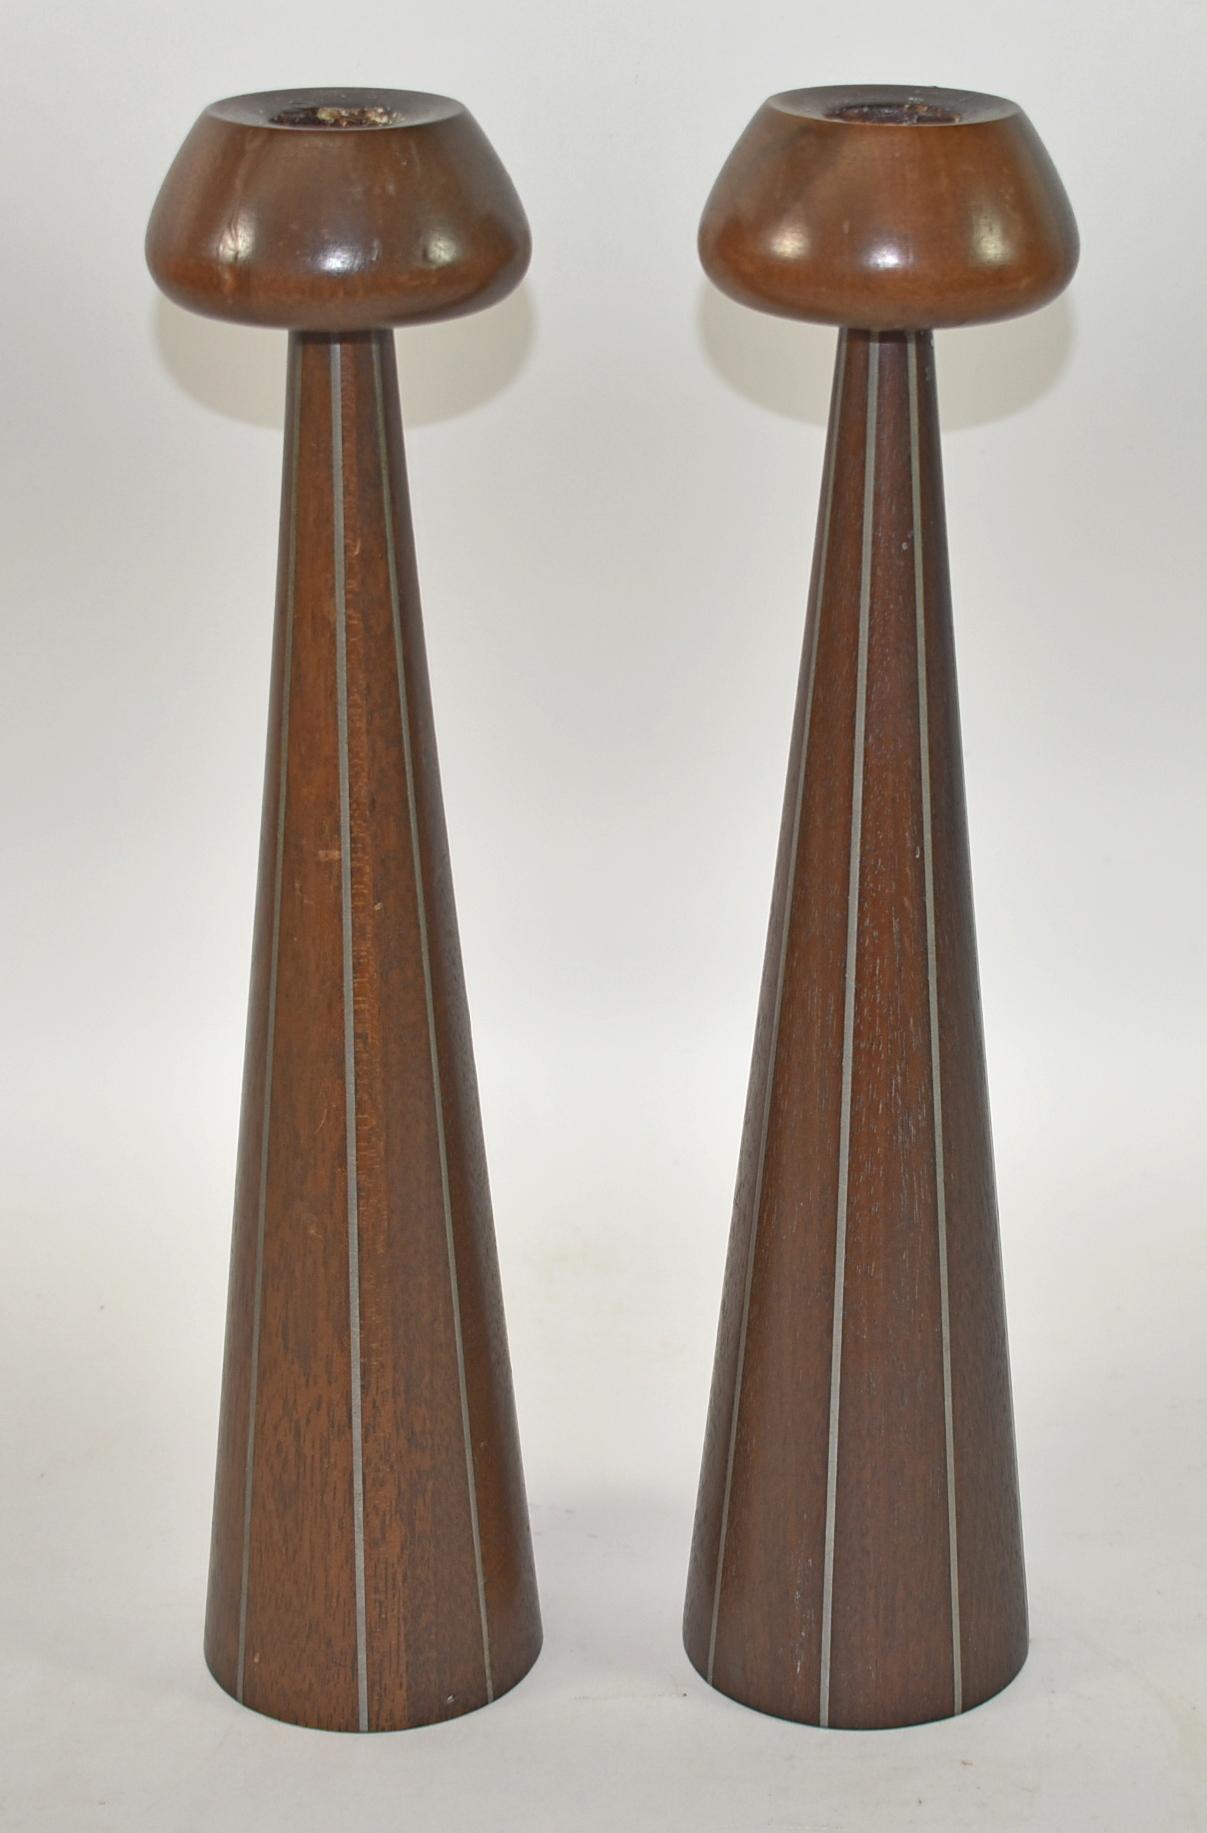 Pair of Walnut and Pewter Candlesticks by Paul Evans and Phillip Powell. circa 1950s. A design from Designer's Inc, an early collaboration between Paul Evans and Phillip Lloyd Powell in the 1950s where they had their studios and joined showroom in